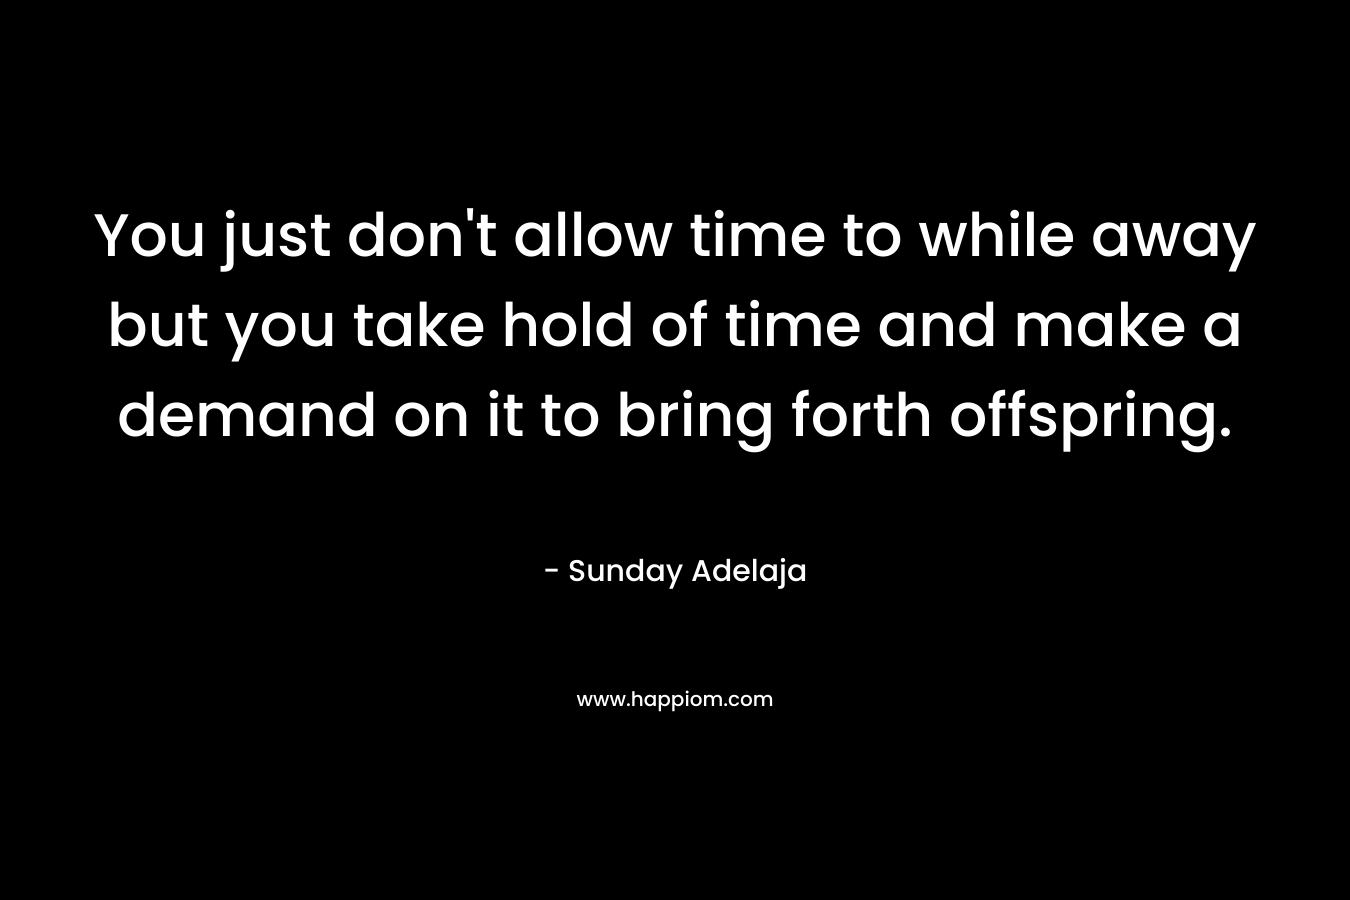 You just don't allow time to while away but you take hold of time and make a demand on it to bring forth offspring.